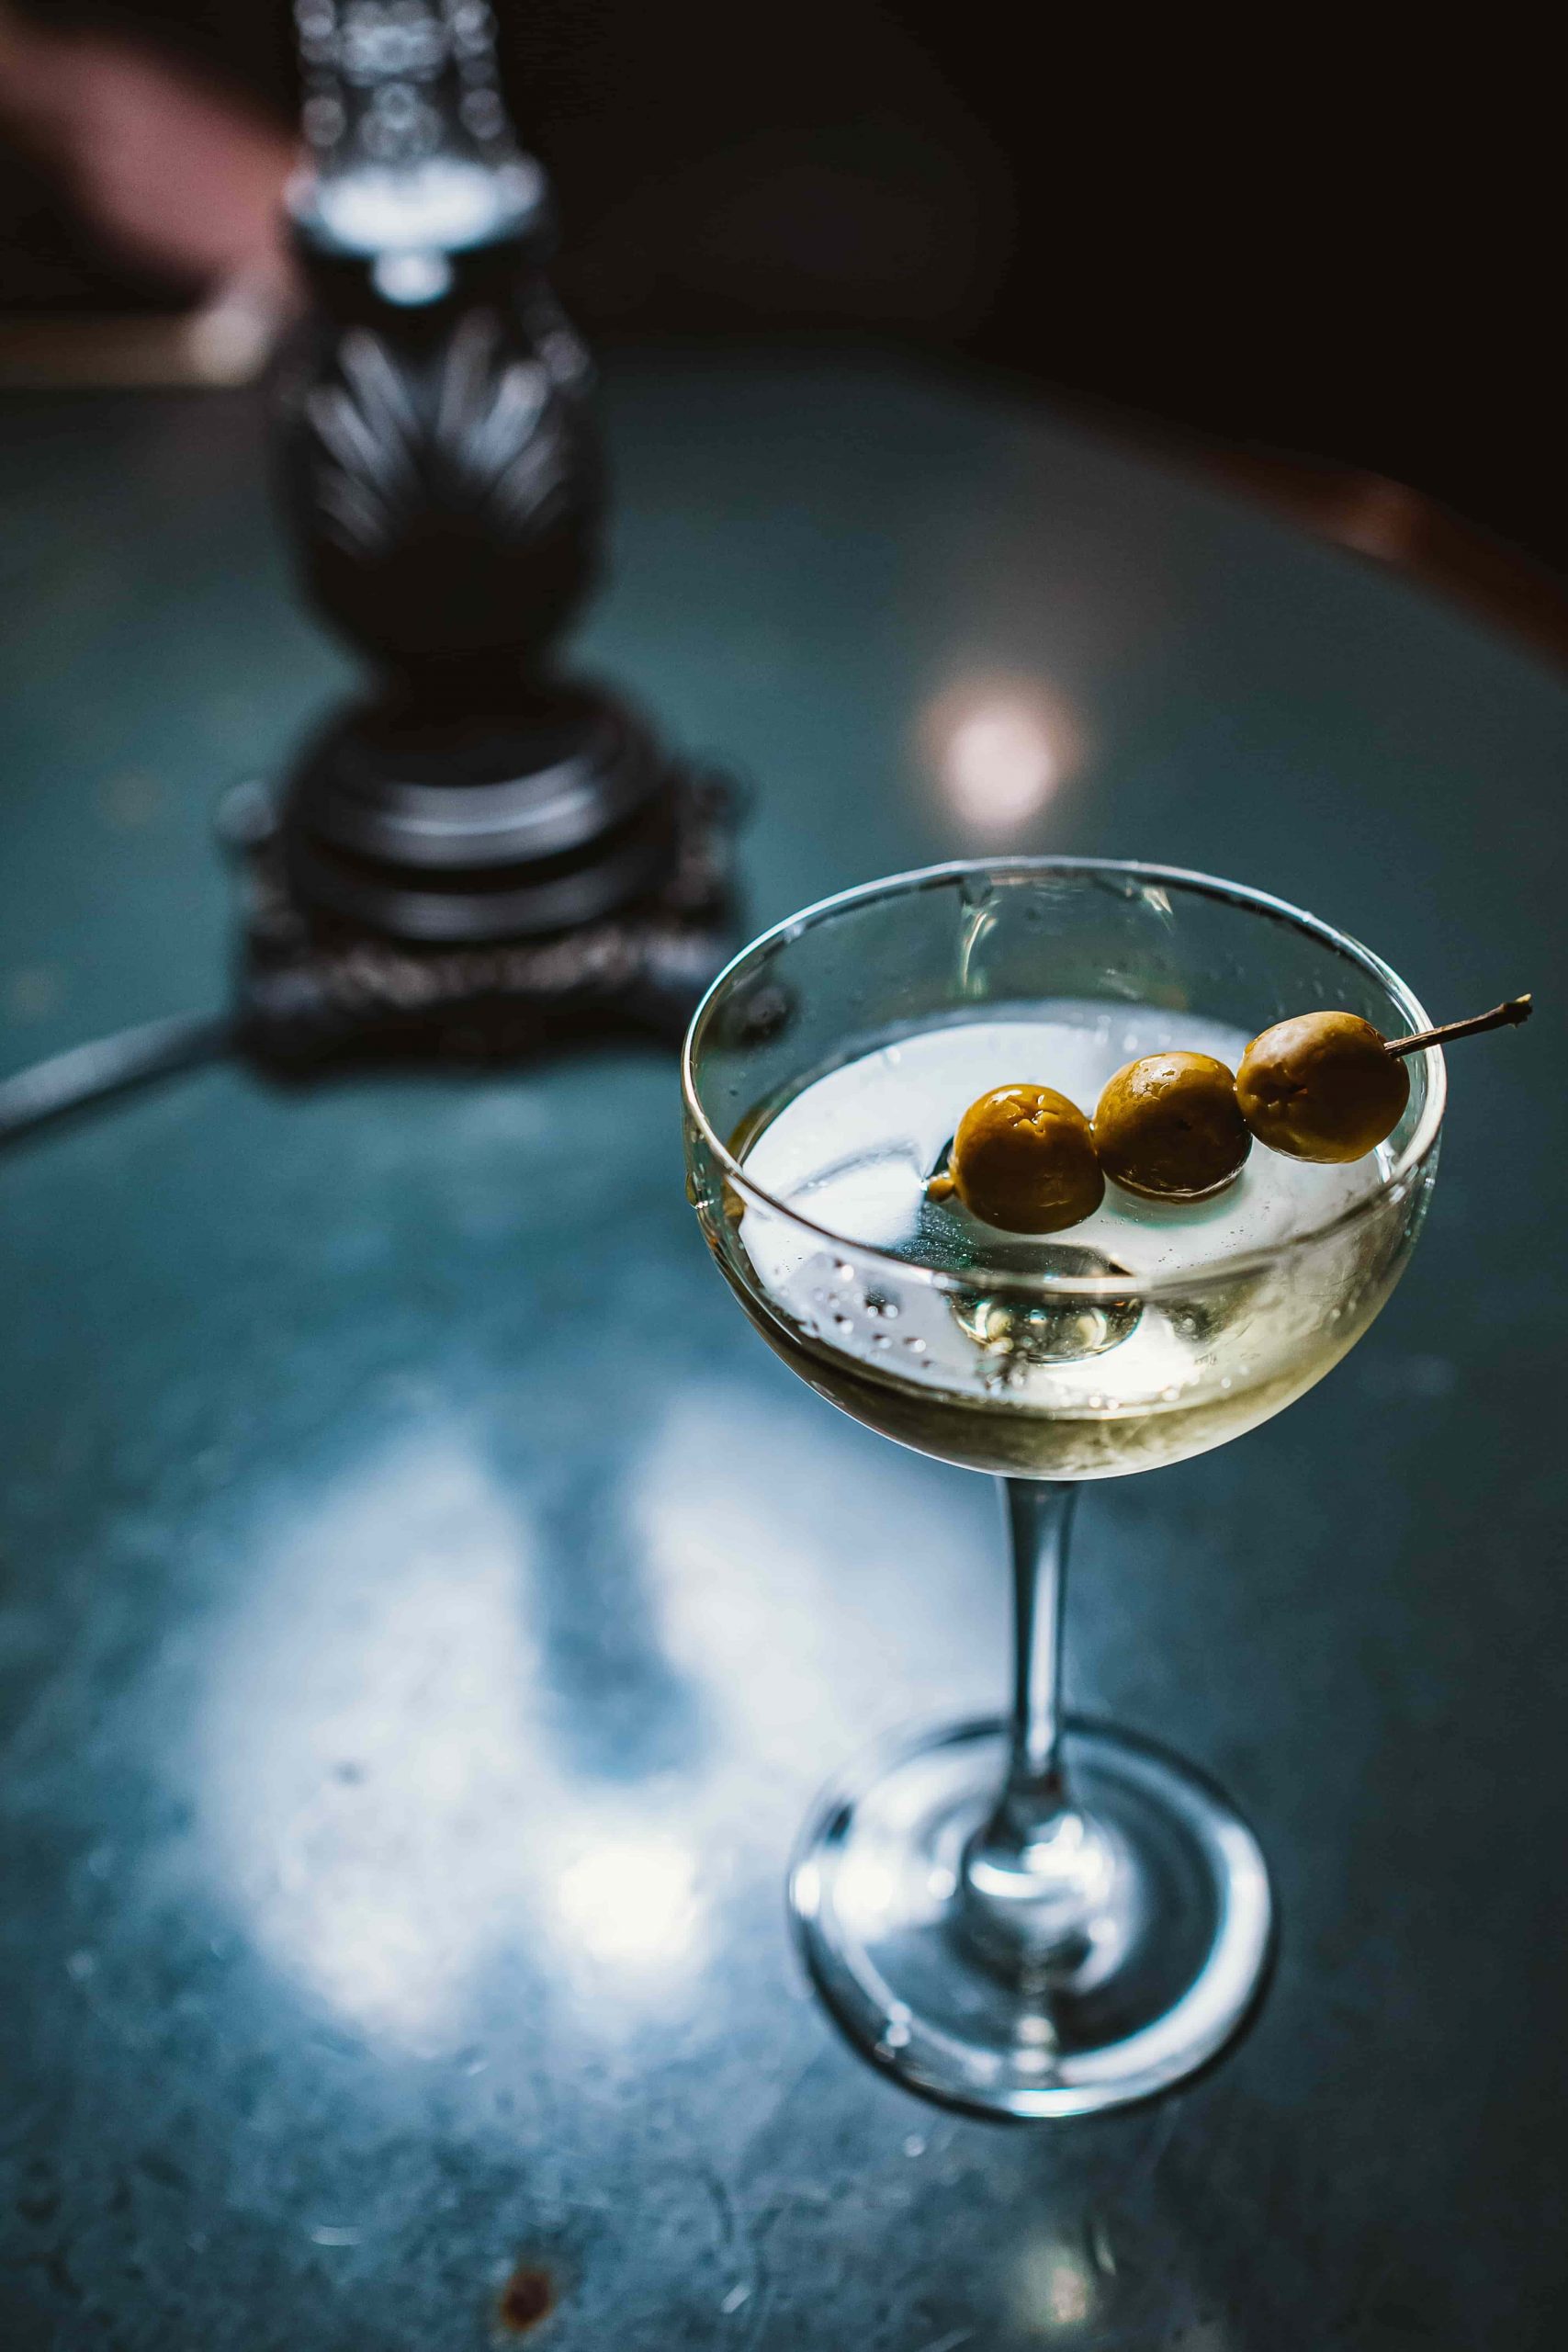 The martini was created in San Francisco